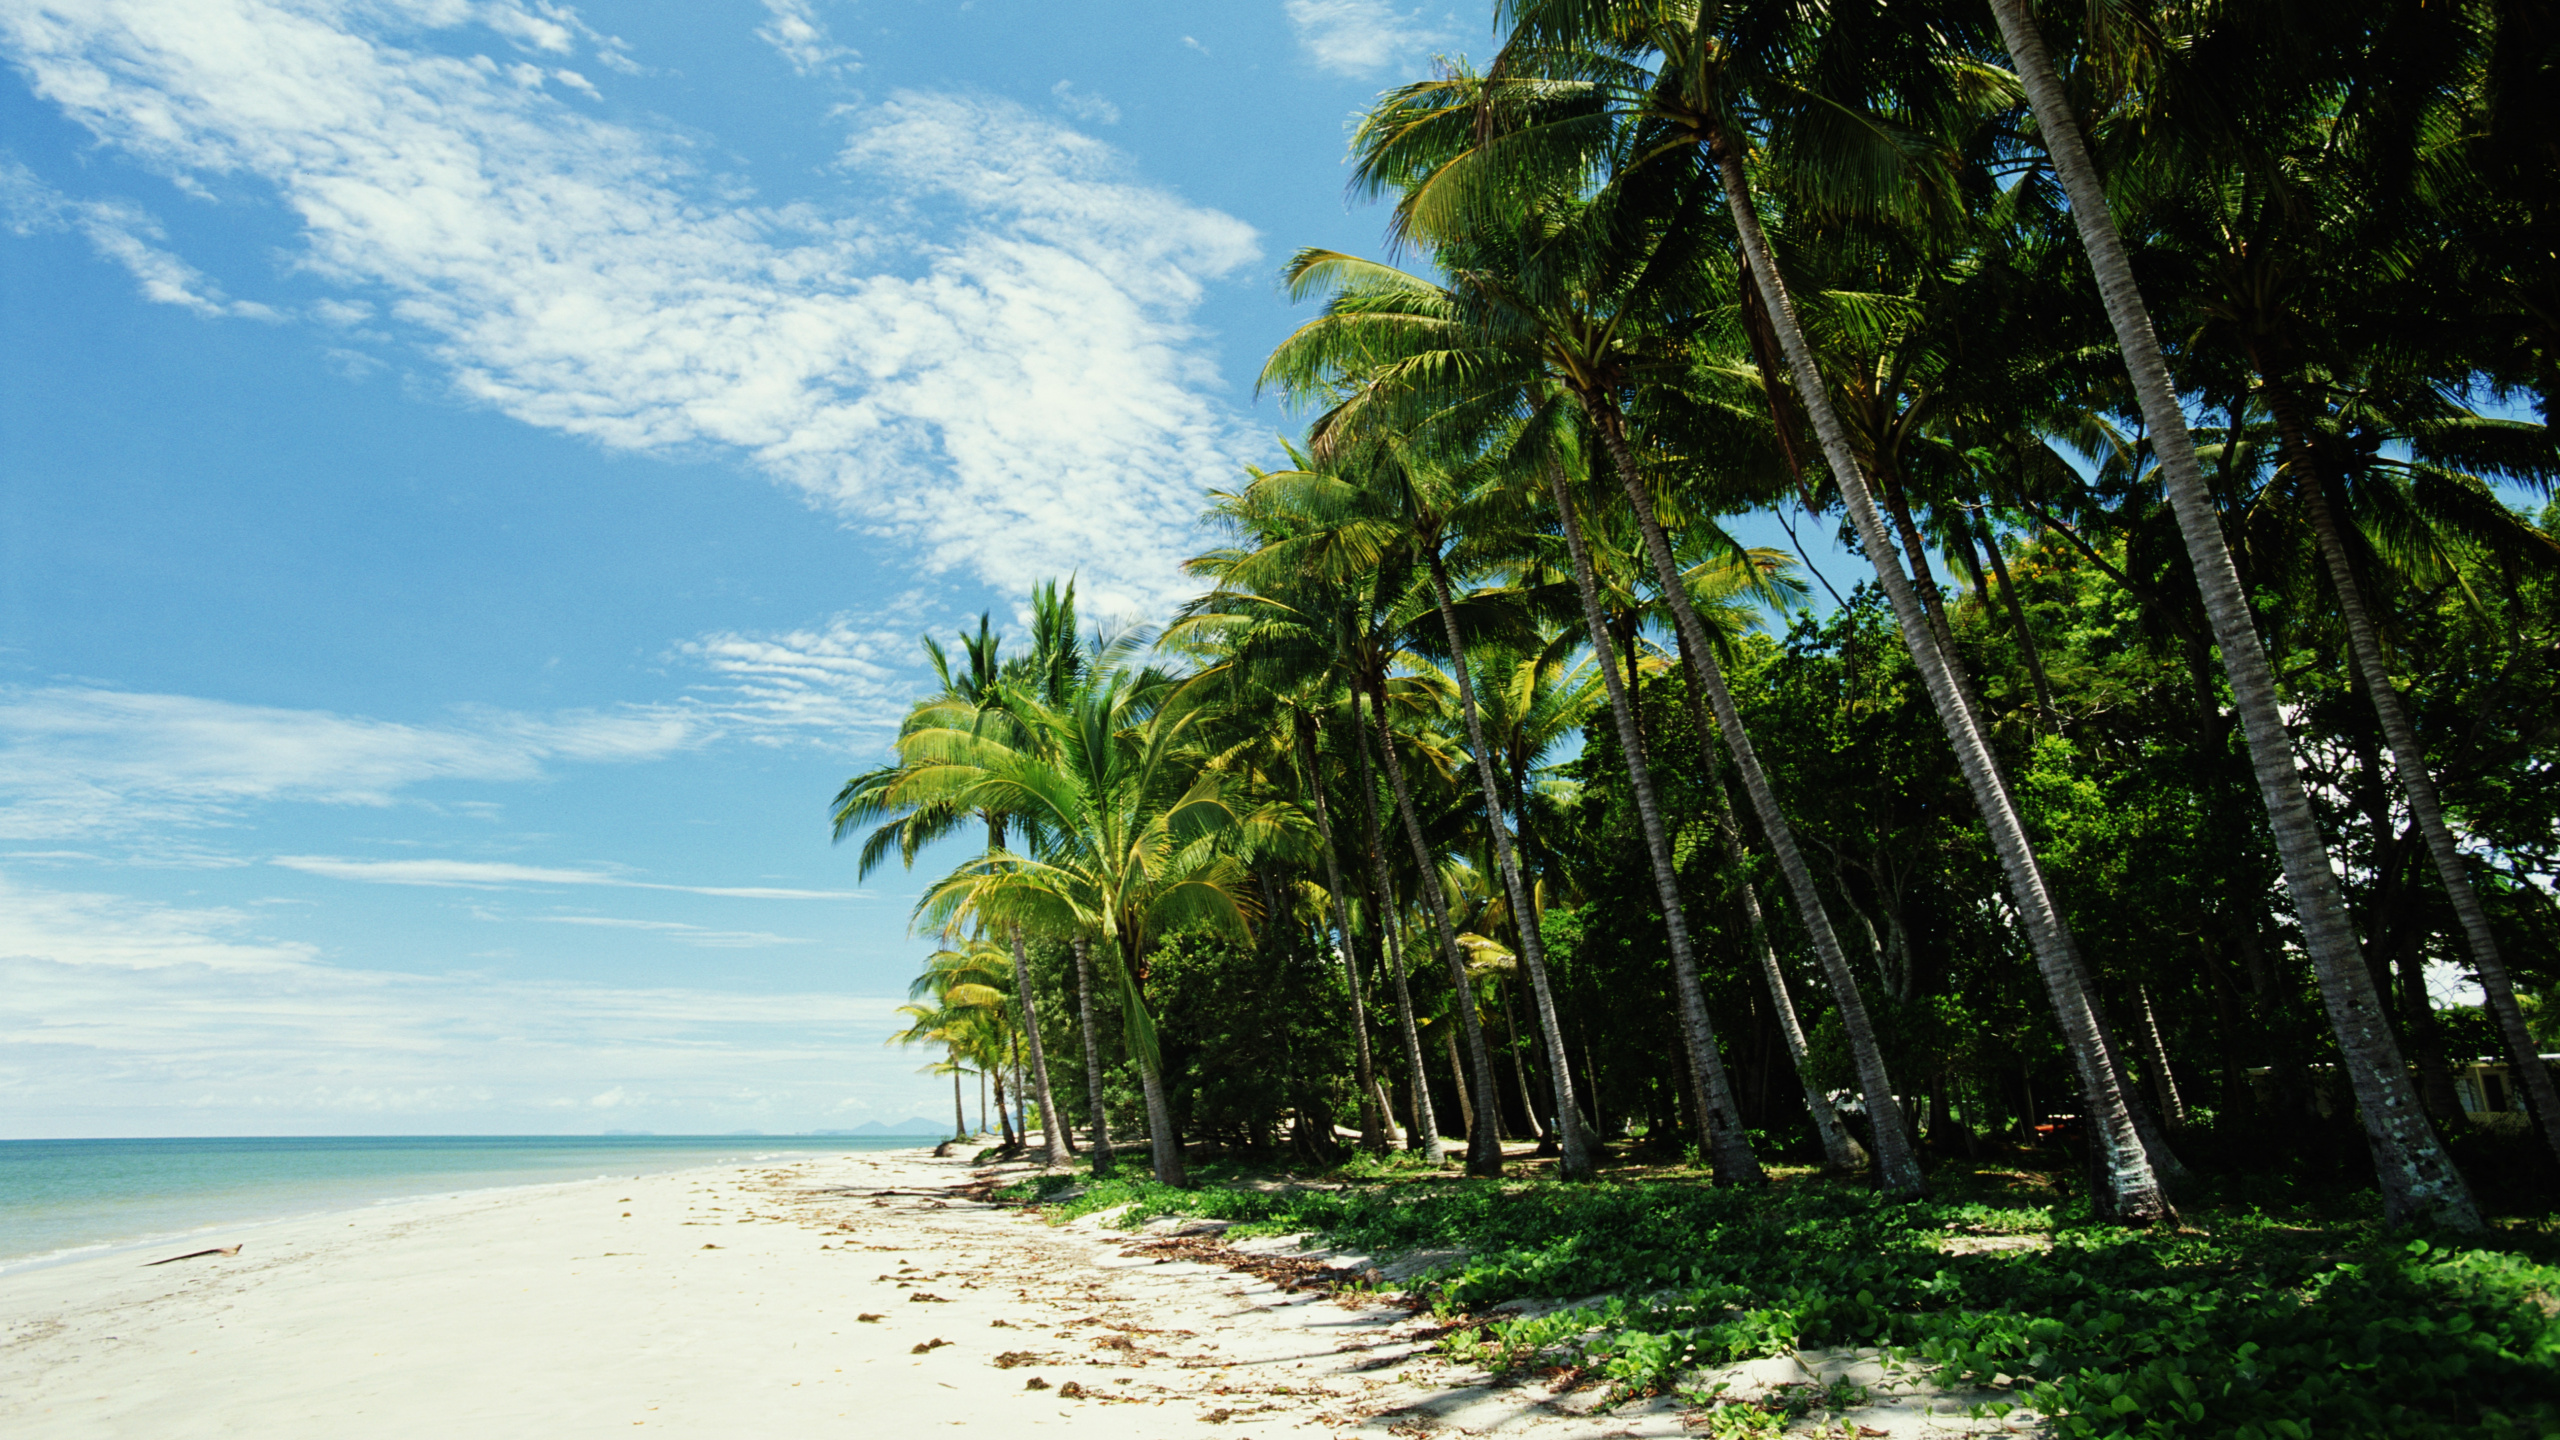 Green Palm Trees on White Sand Beach During Daytime. Wallpaper in 2560x1440 Resolution